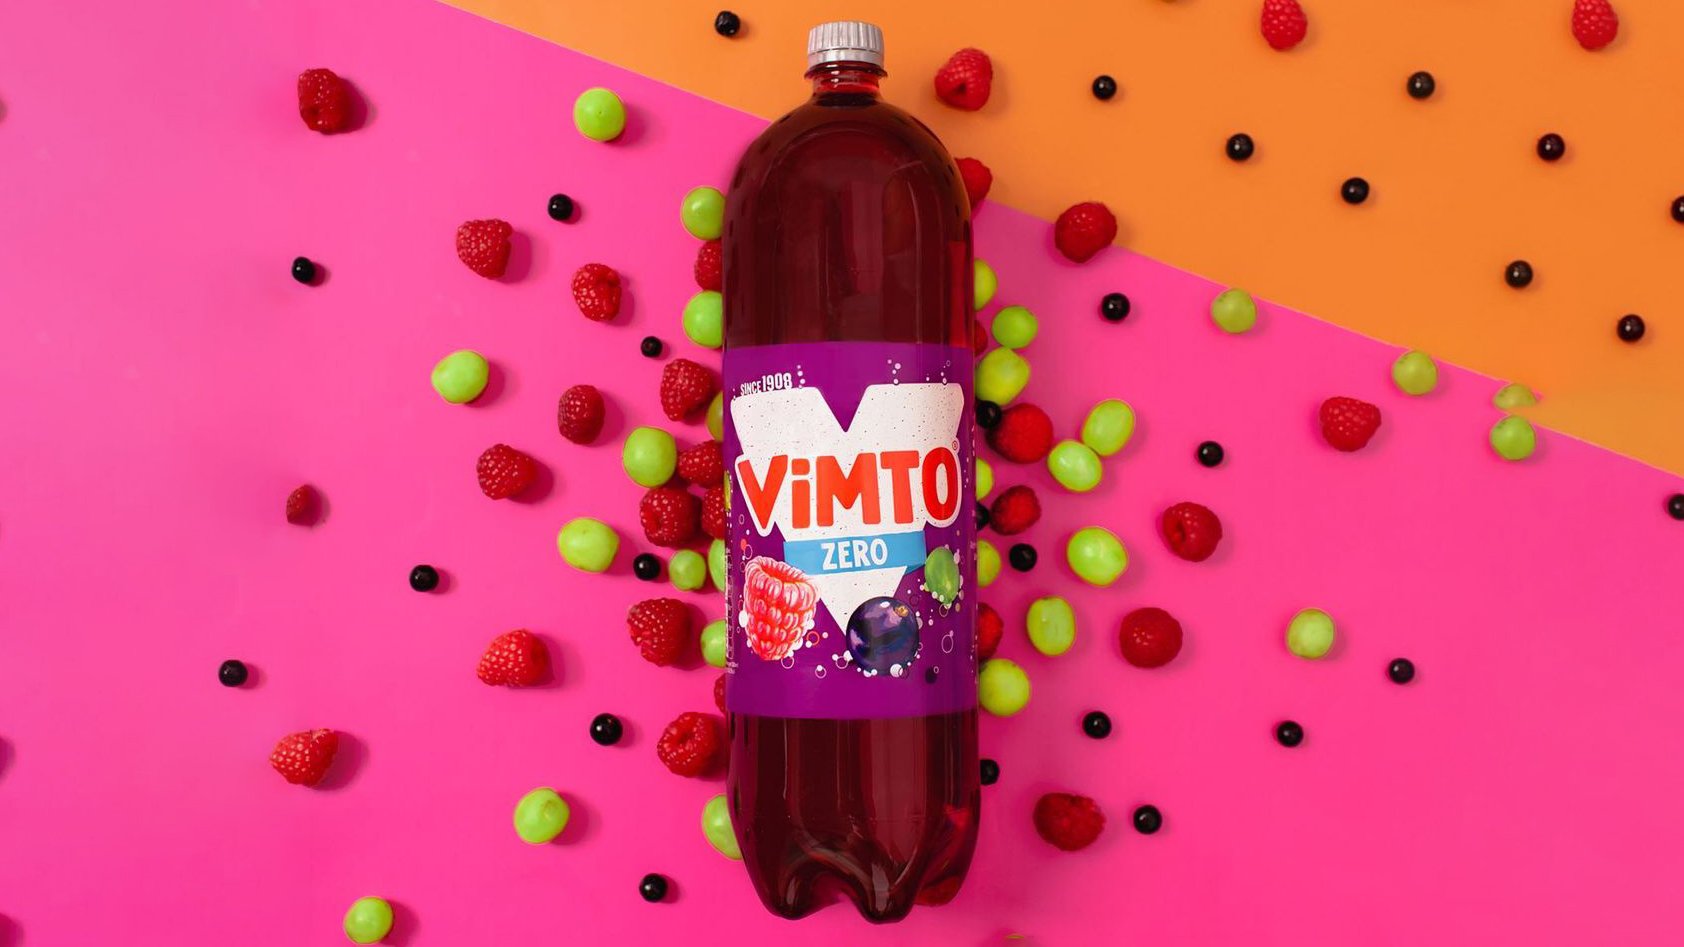 Vimto Receives Heavy Backlash After Iconic Squash Drink No Longer Suitable For Vegans